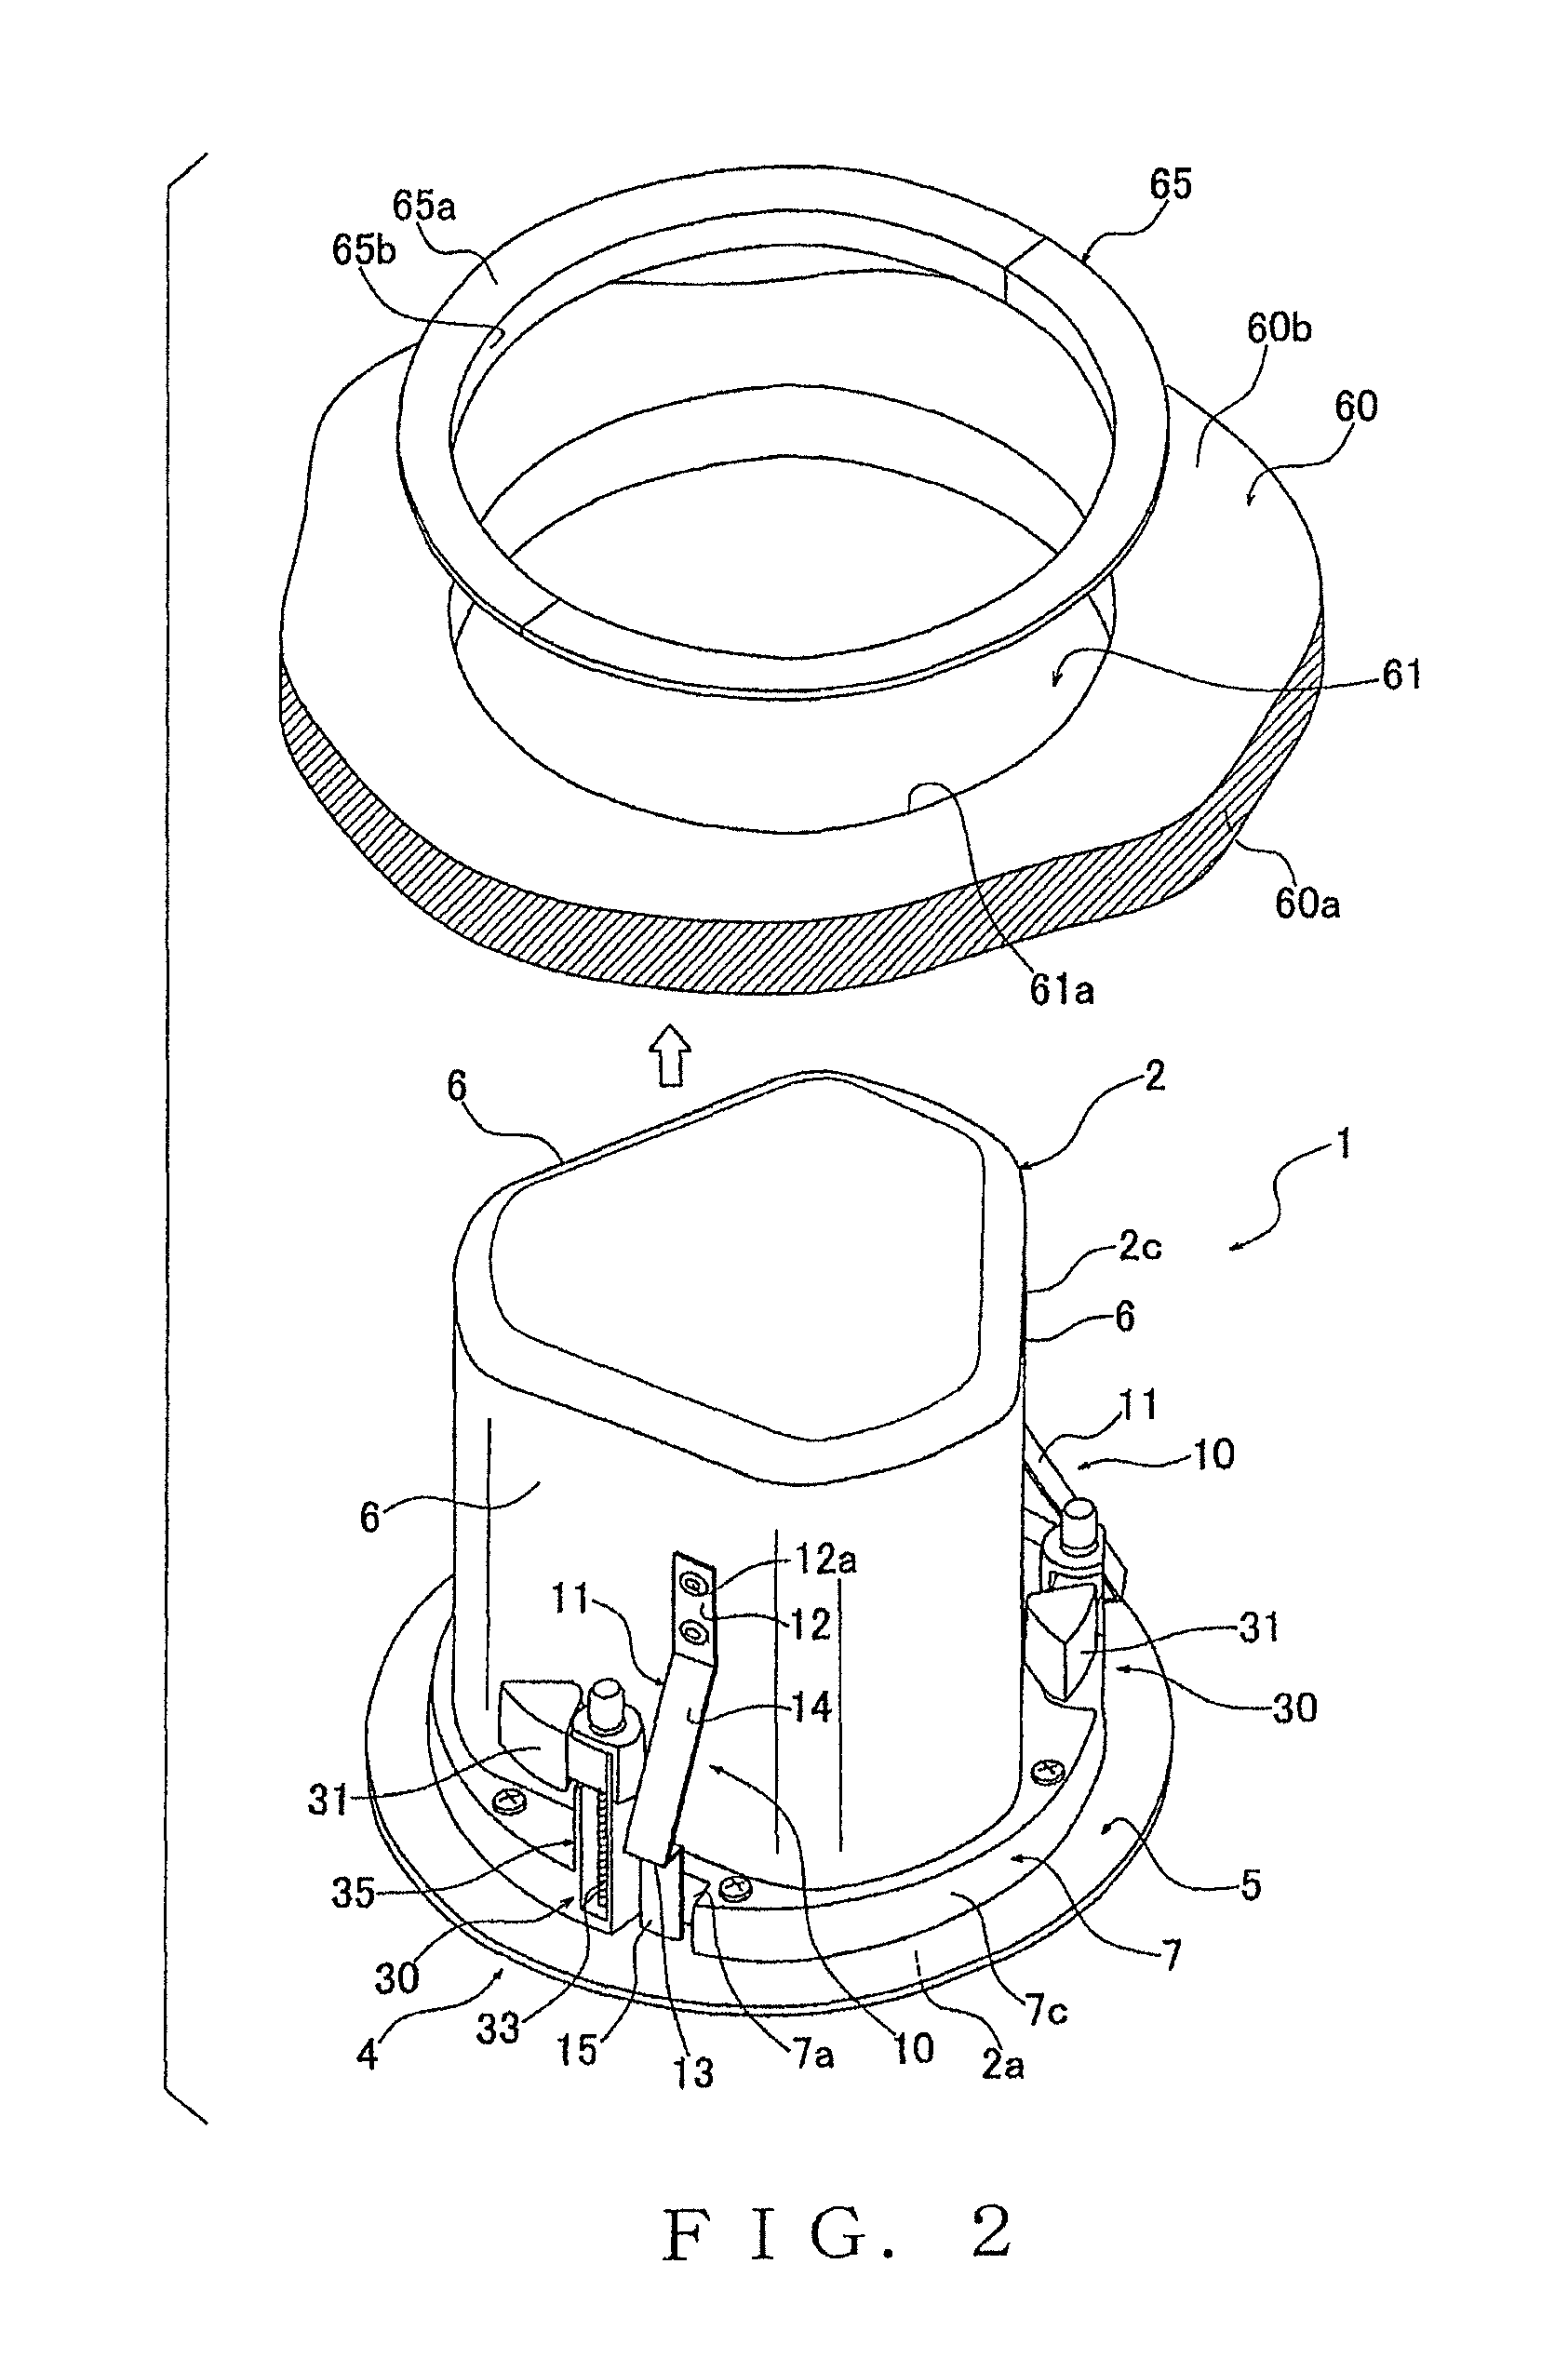 Speaker unit and speaker unit mounting structure